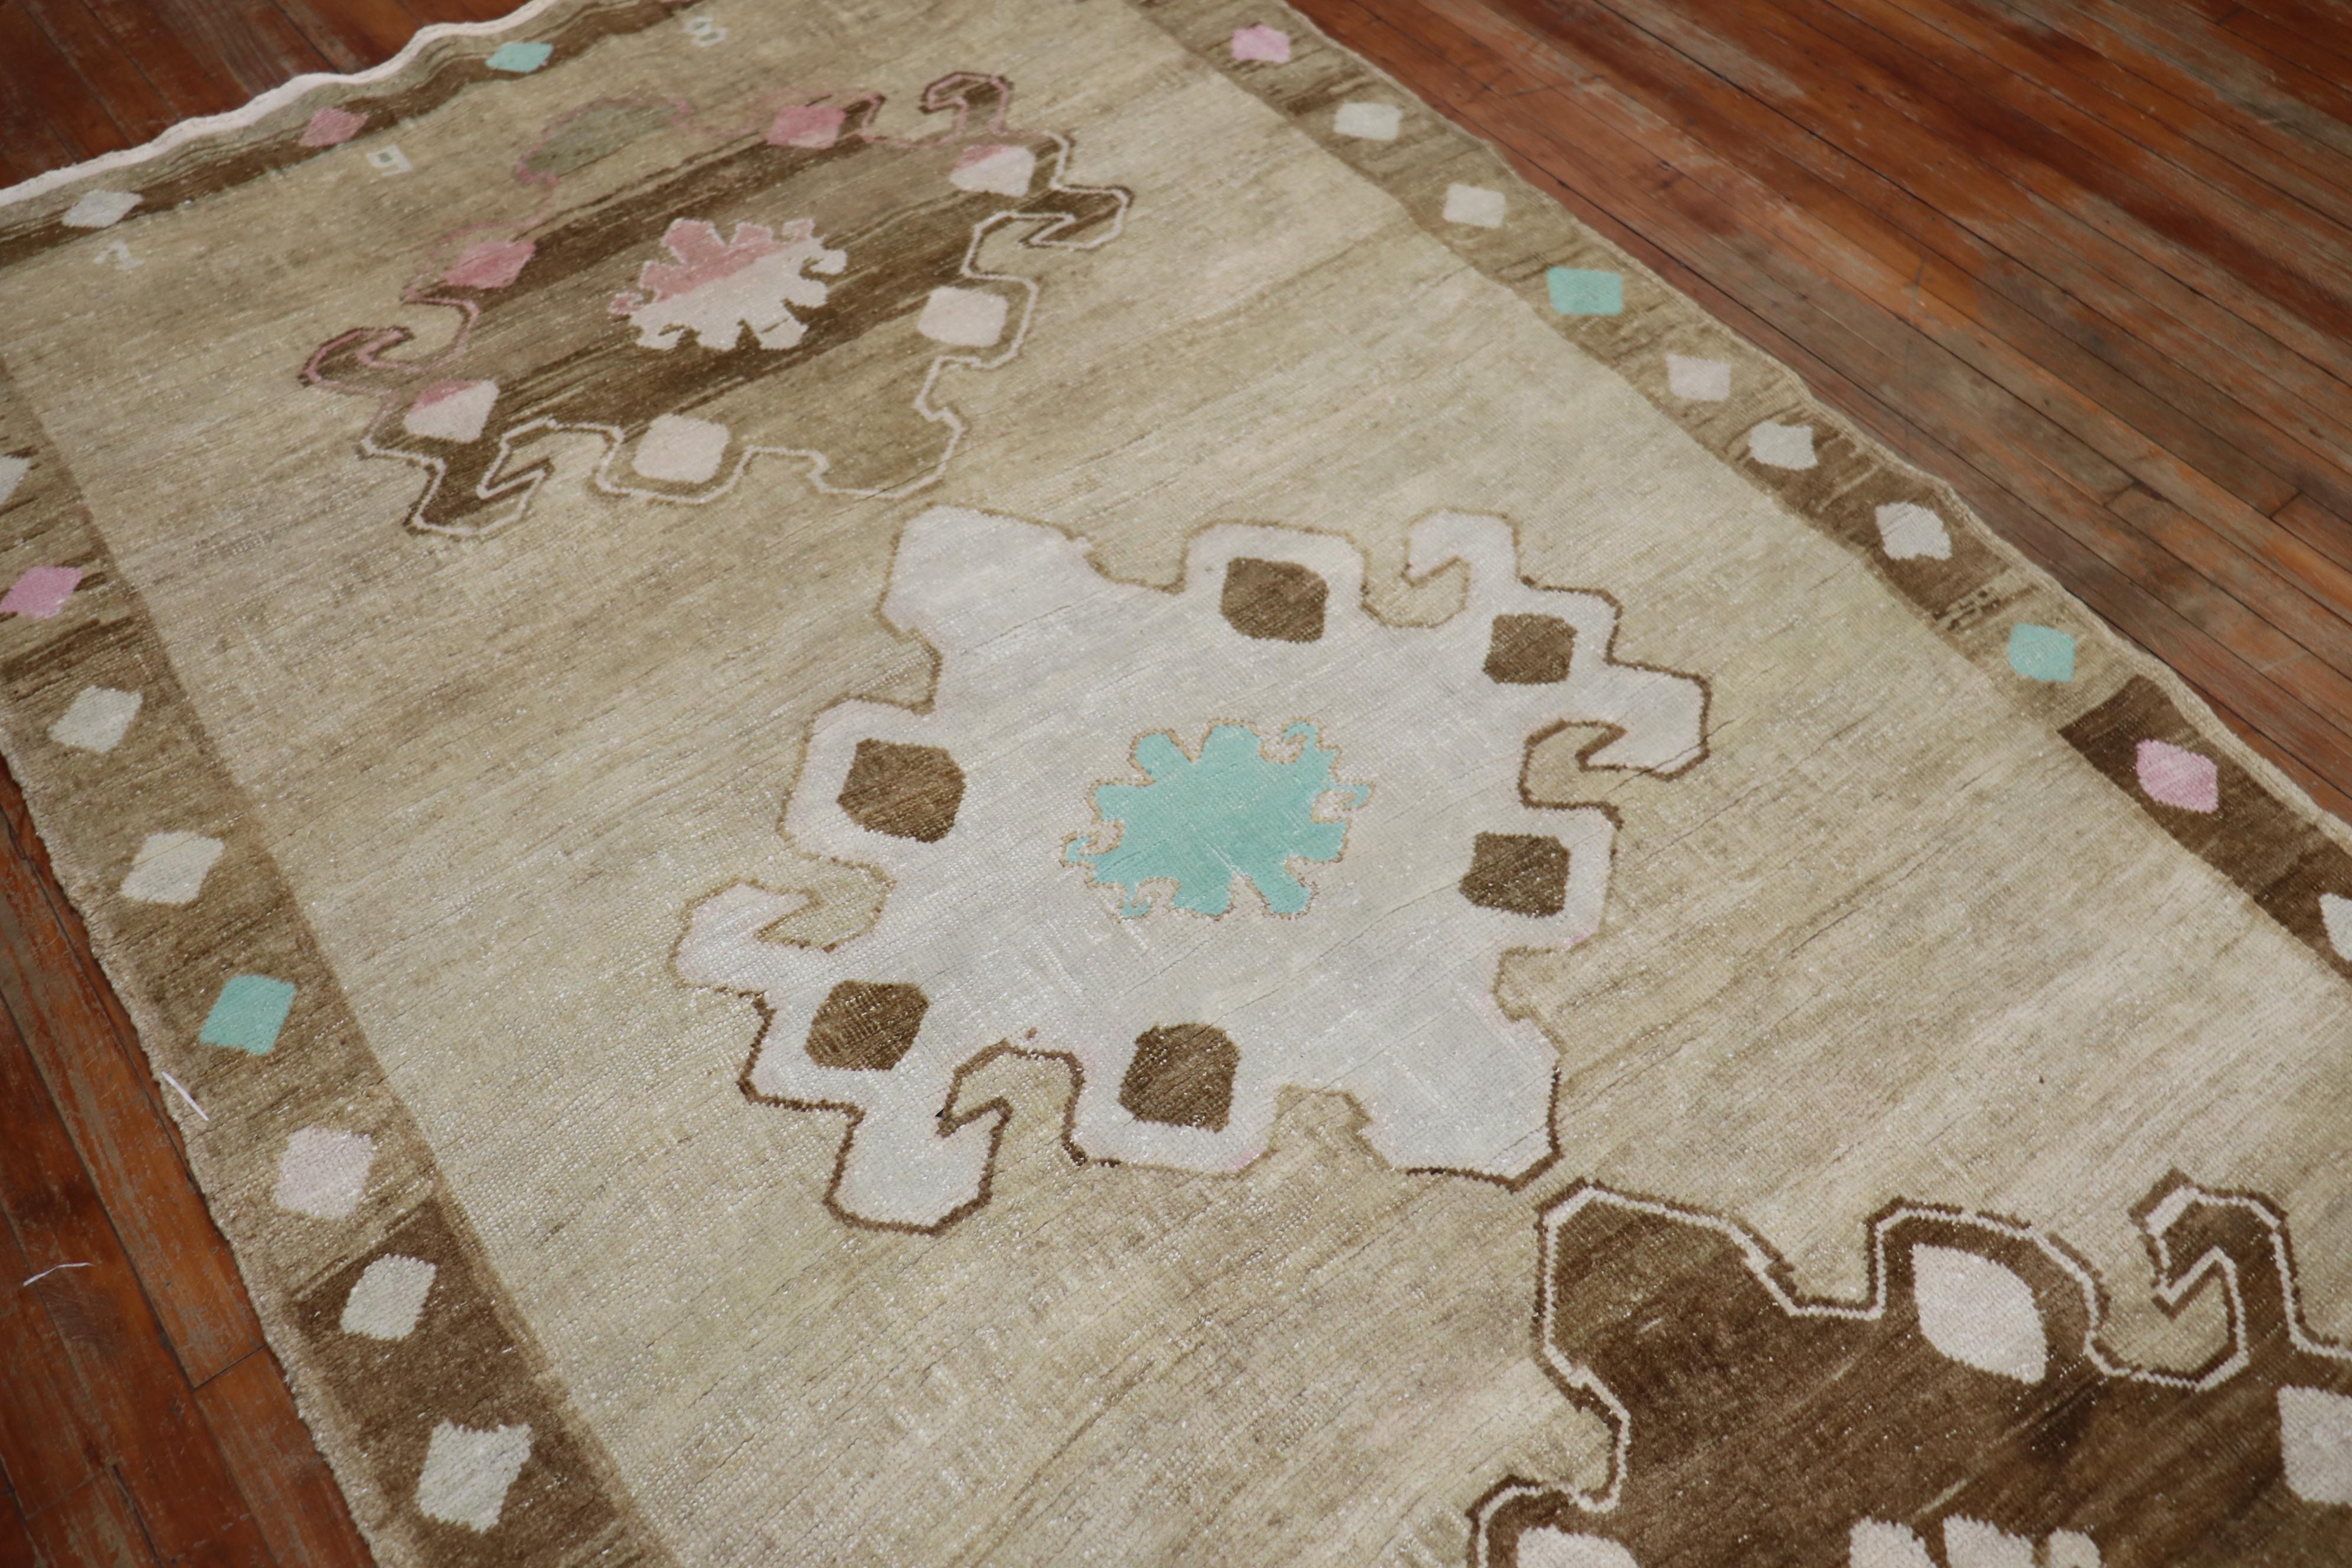 A one of a kind boutique-looking hand-knotted vintage Turkish Kars rug featuring earthy cotton accents in turquoise and pink on a striated brown field covered by 3 large geometric medallions in dark brown and ivory. The accent colors were handwoven